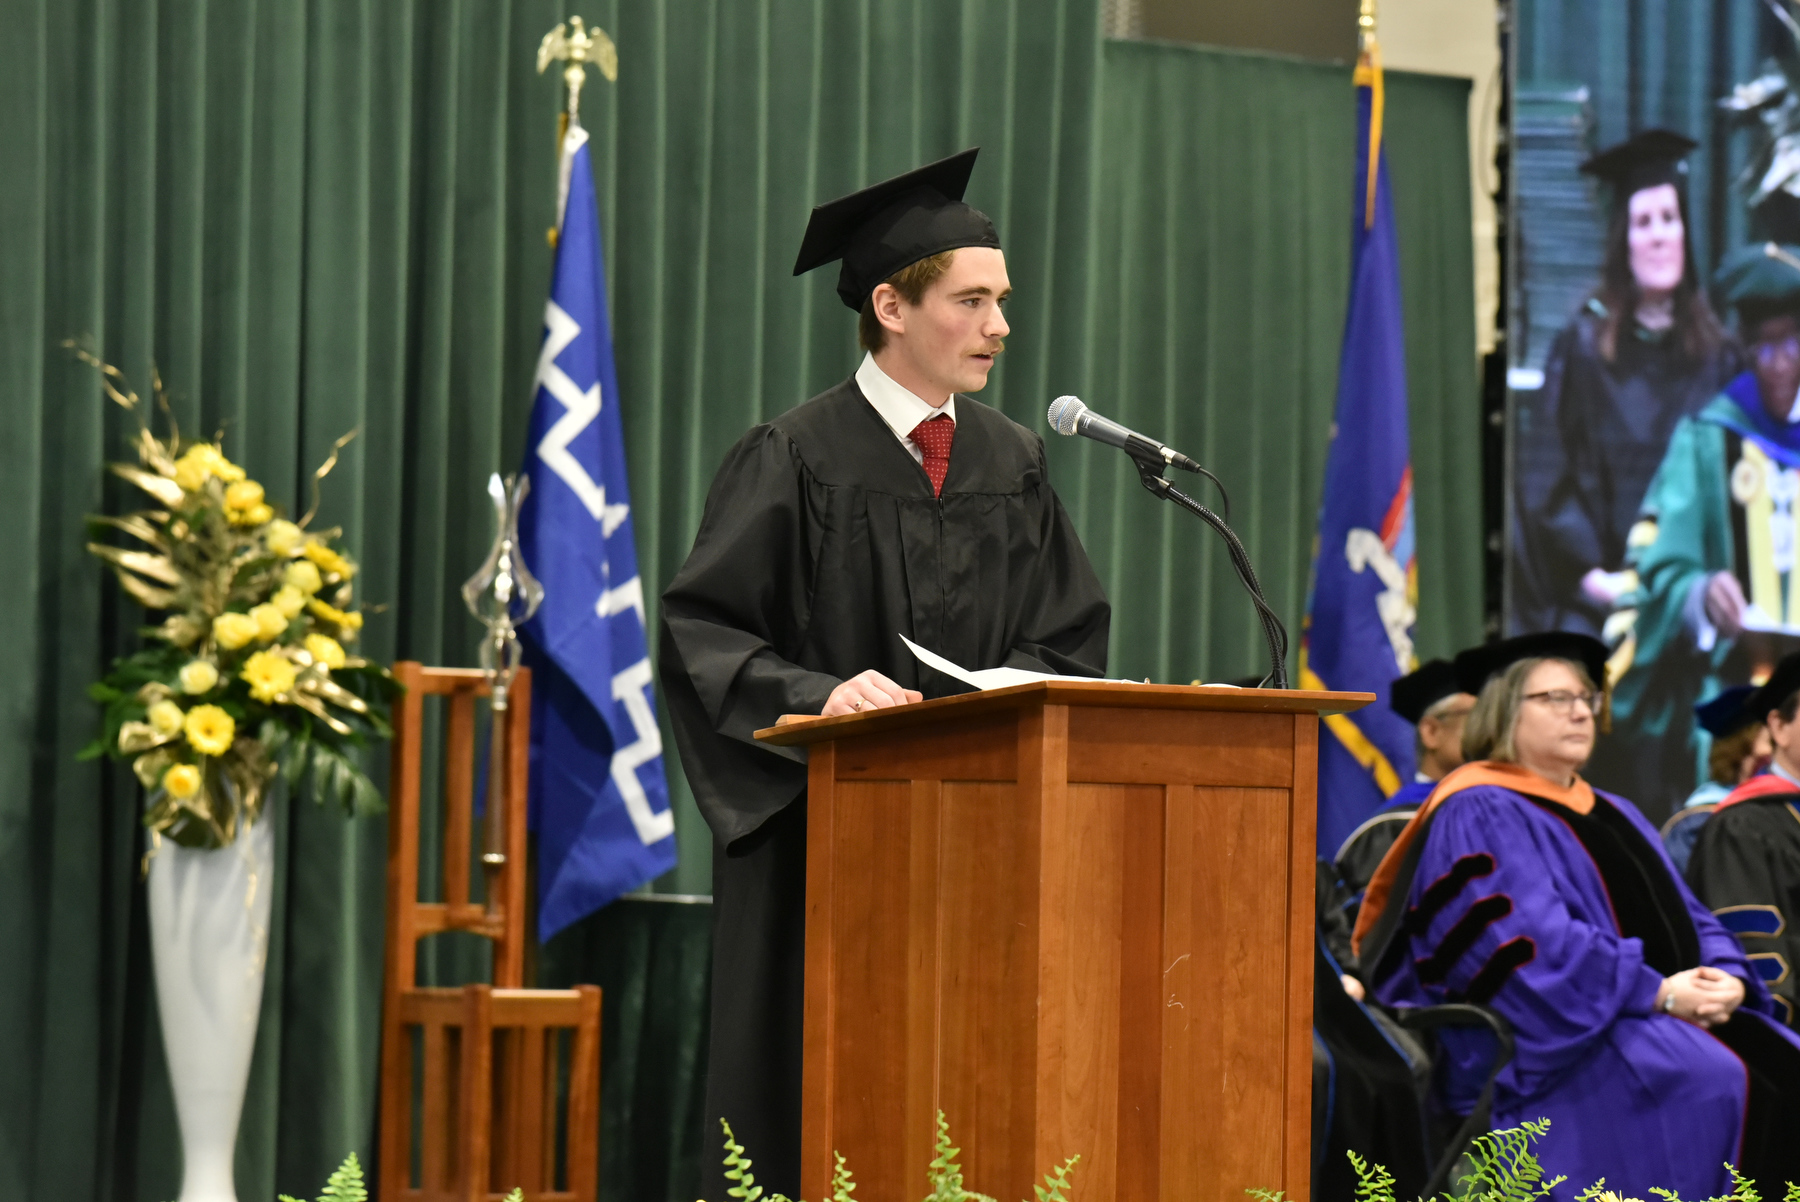 Austin Davis, Student Association President and a member of the Class of 2025, provides the student address to the graduates.